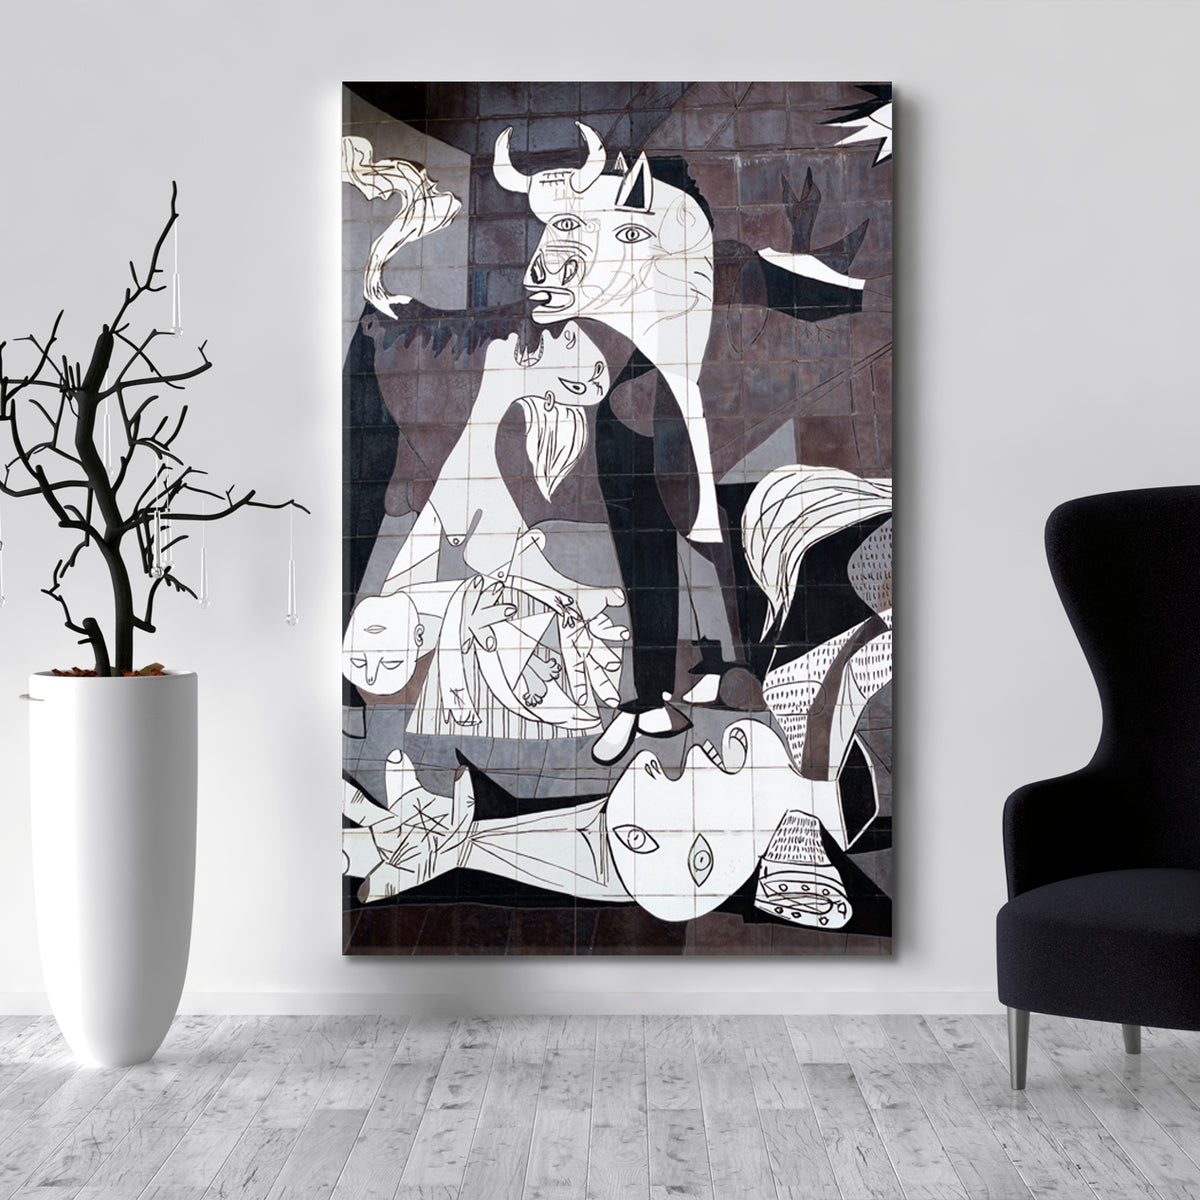 Guernica Painting Picasso Street Art Black and White Wall Art Print Artesty 1 Panel 16"x24" 